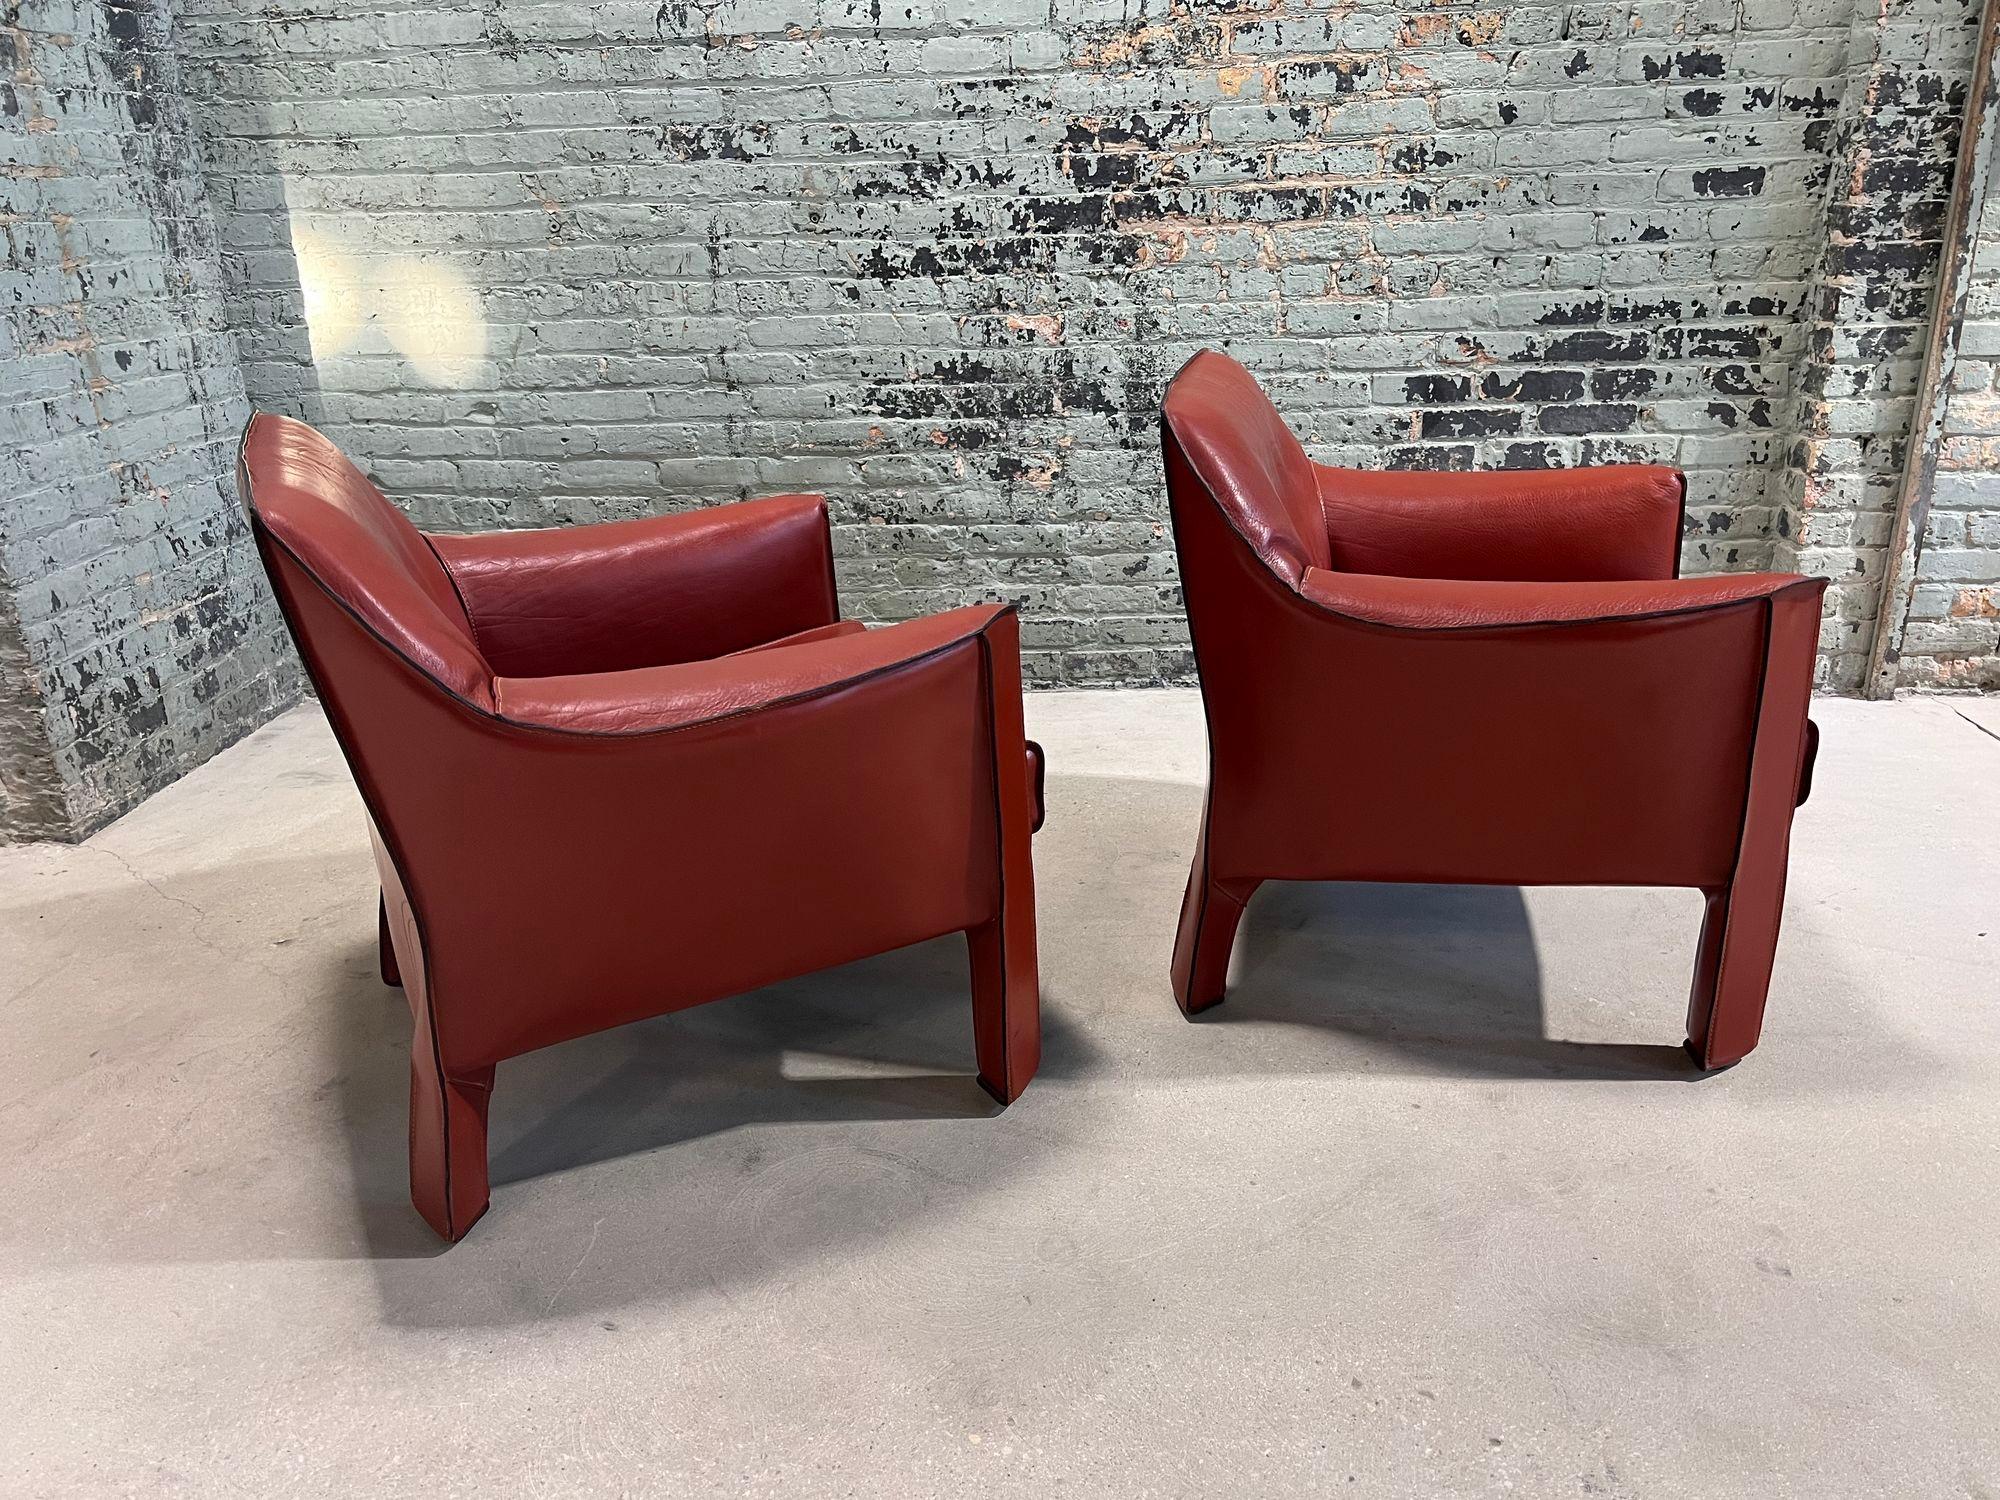 Steel Mario Bellini Pair Leather Cab Lounge Chairs, Model 415, Italy 1970